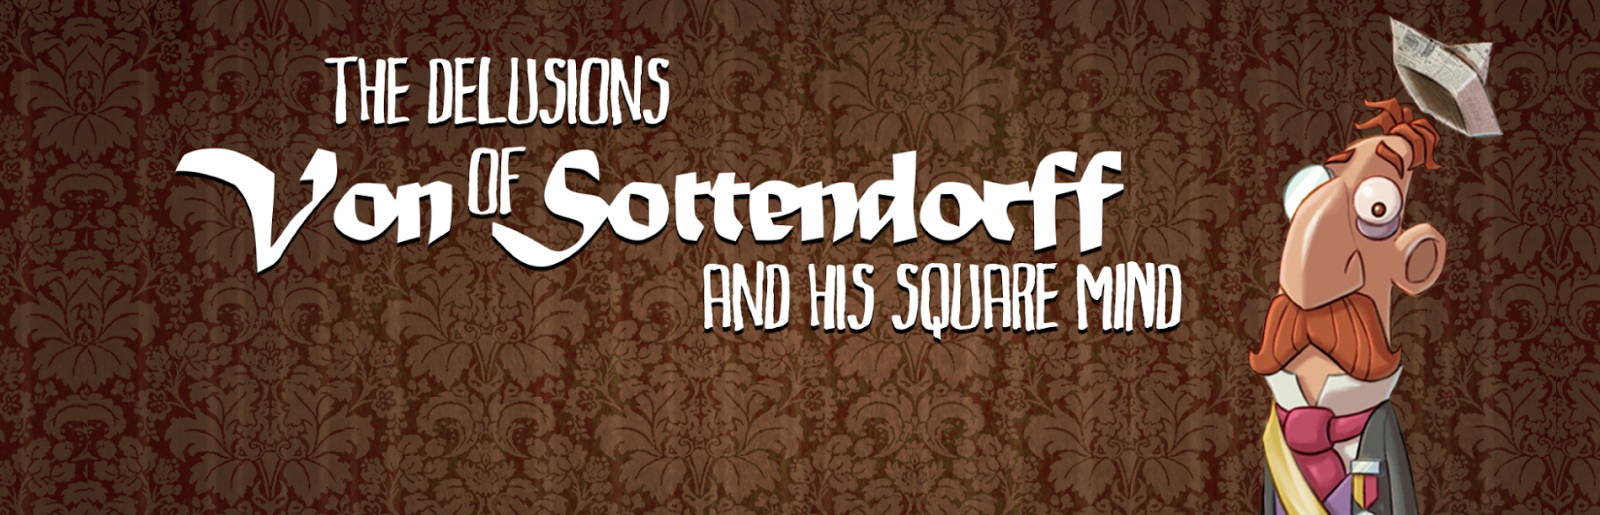 Review: The Delusions of Von Sottendorff and his Square Mind